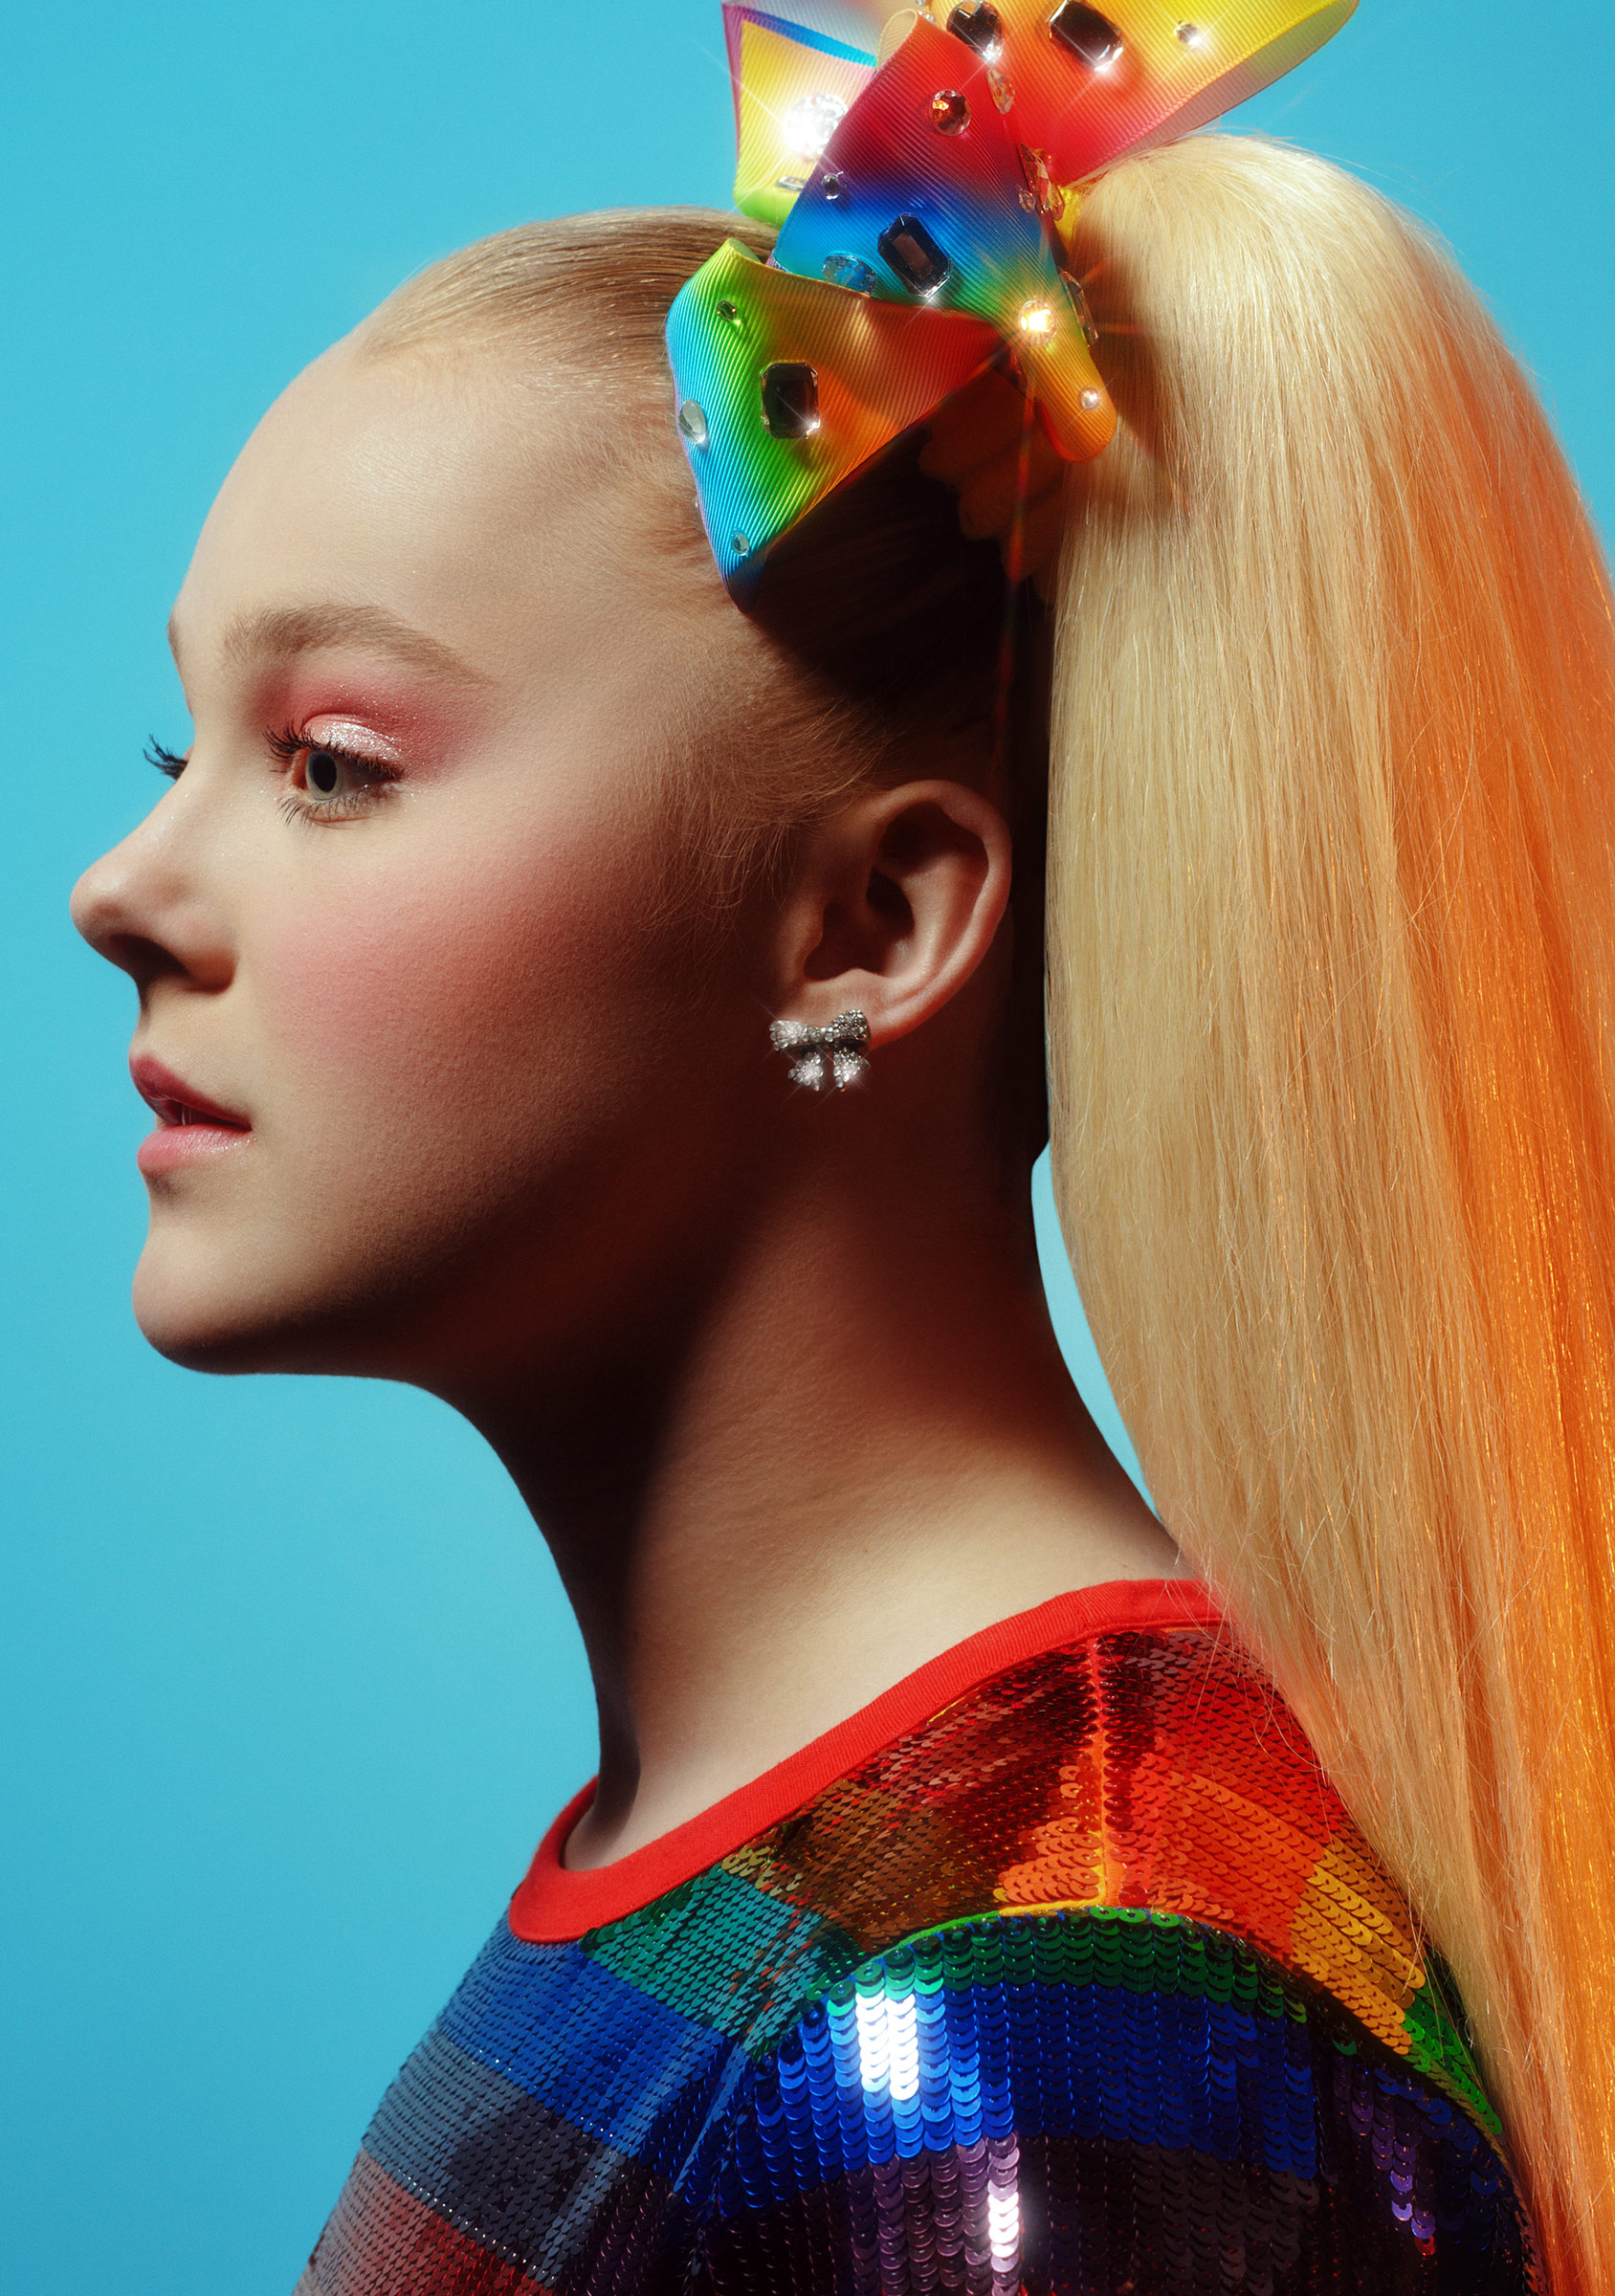 How Child Star JoJo Siwa Built Her Sparkly Empire | Time